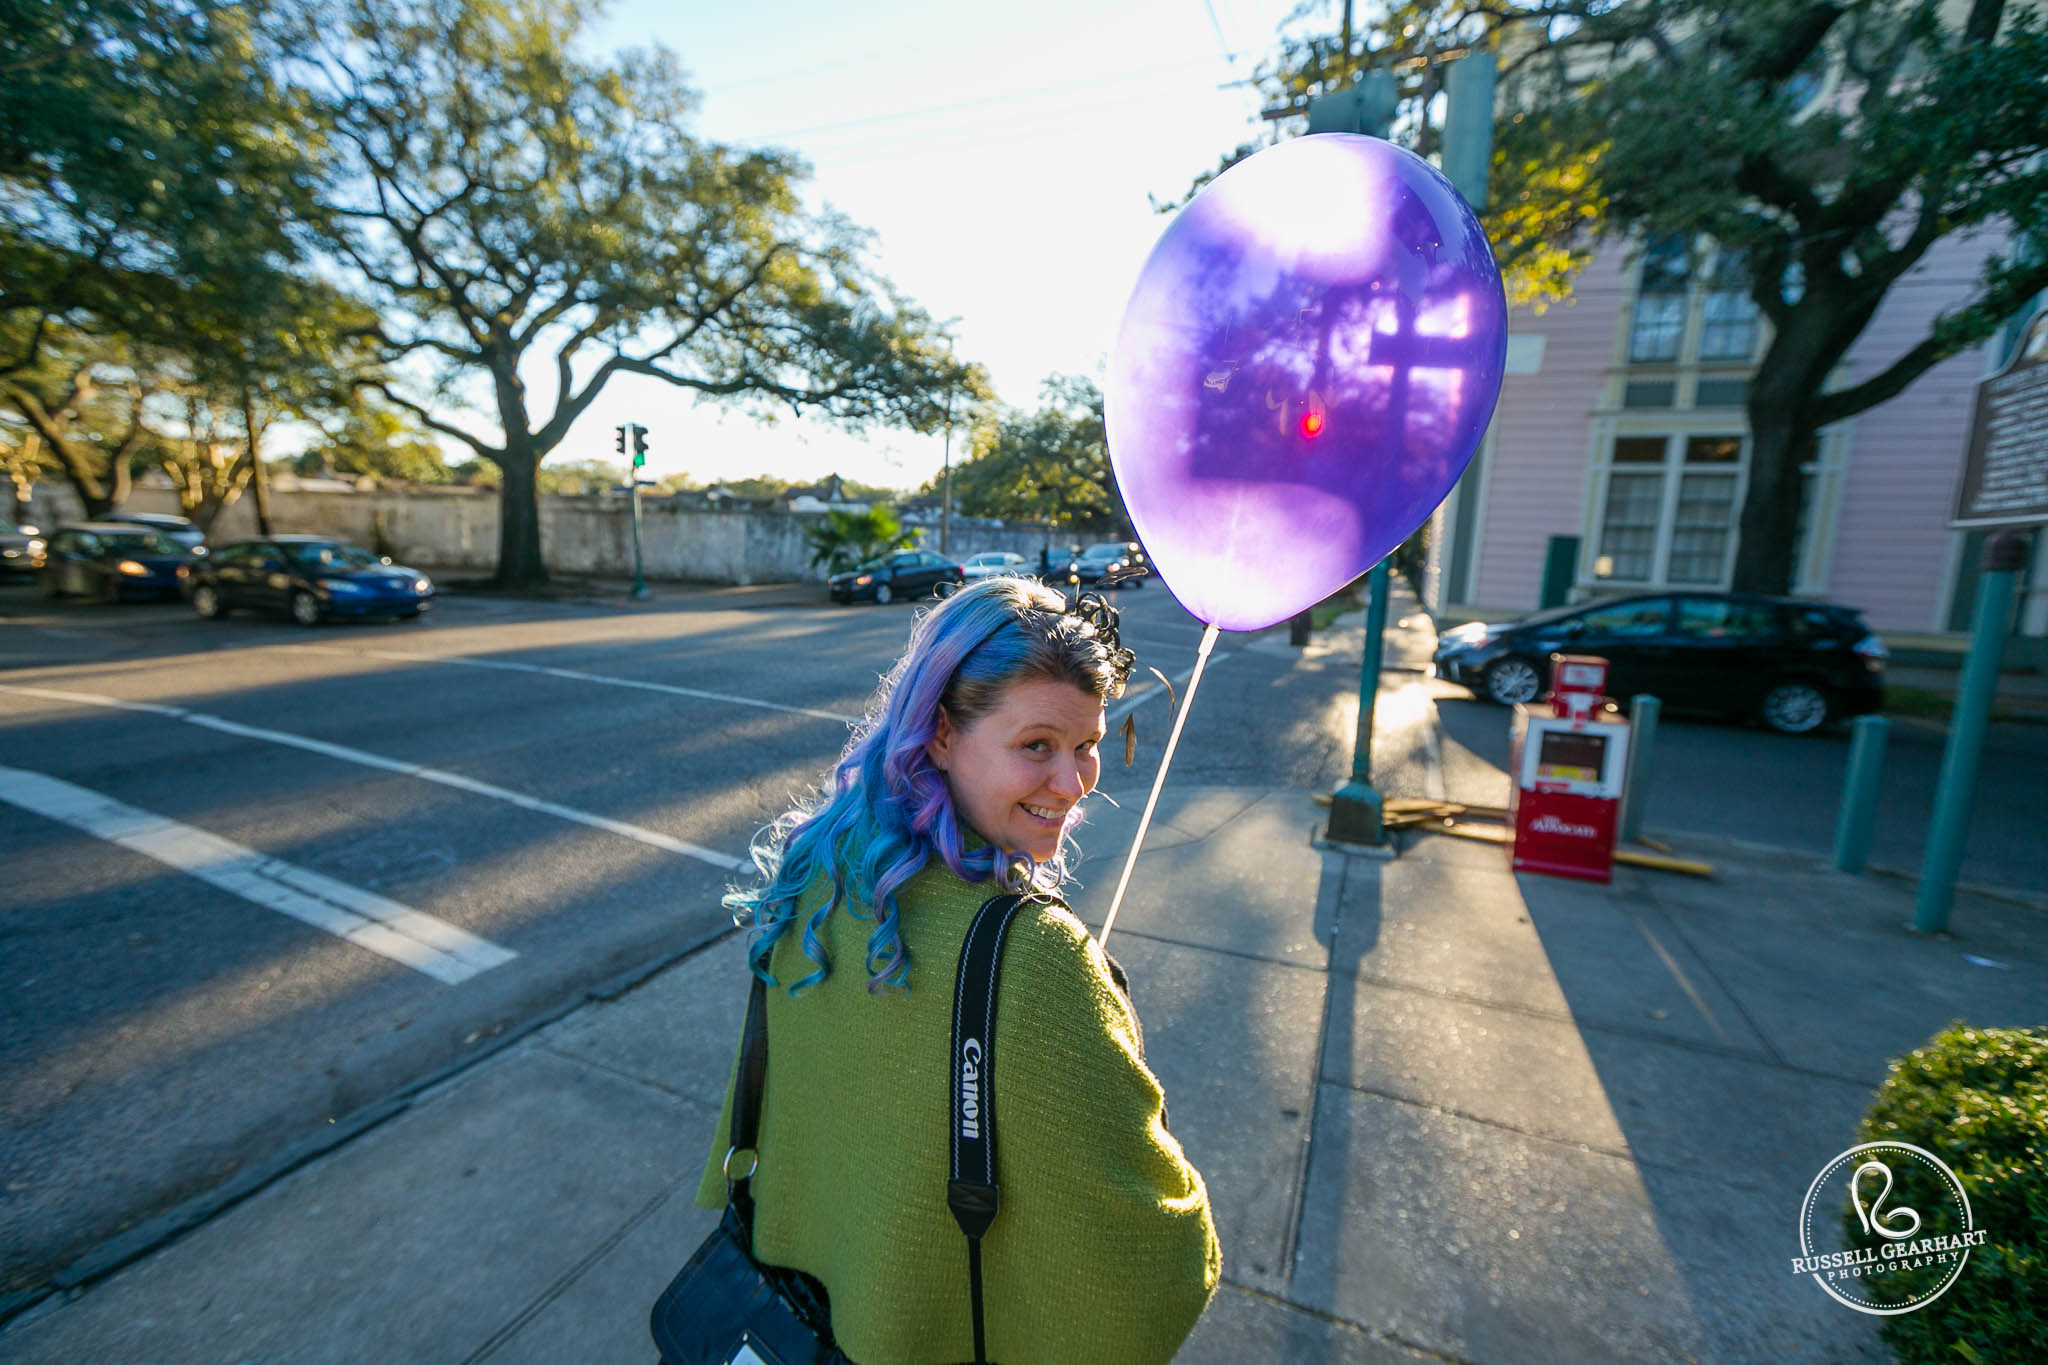 You're never too old to have a purple balloon for your birthday!